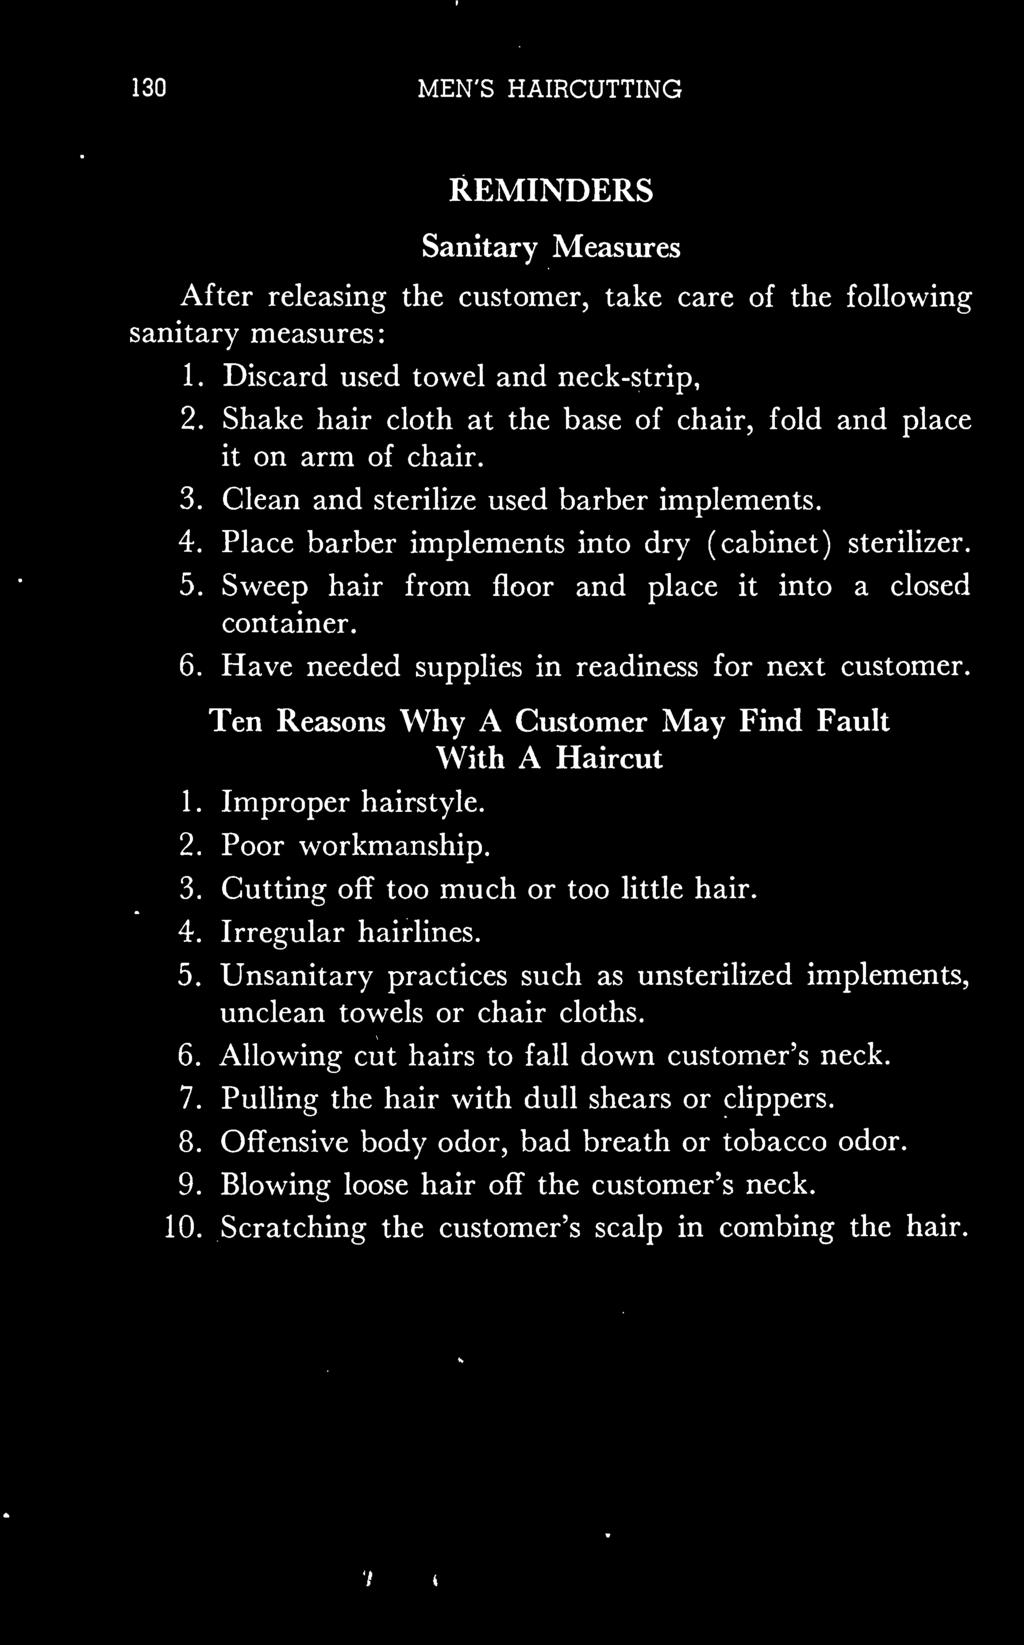 Sweep hair from floor and place it into a closed container. 6. Have needed supplies in readiness for next customer. Ten Reasons Why A Customer May With A Haircut Find Fault 1. Improper hairstyle. 2.